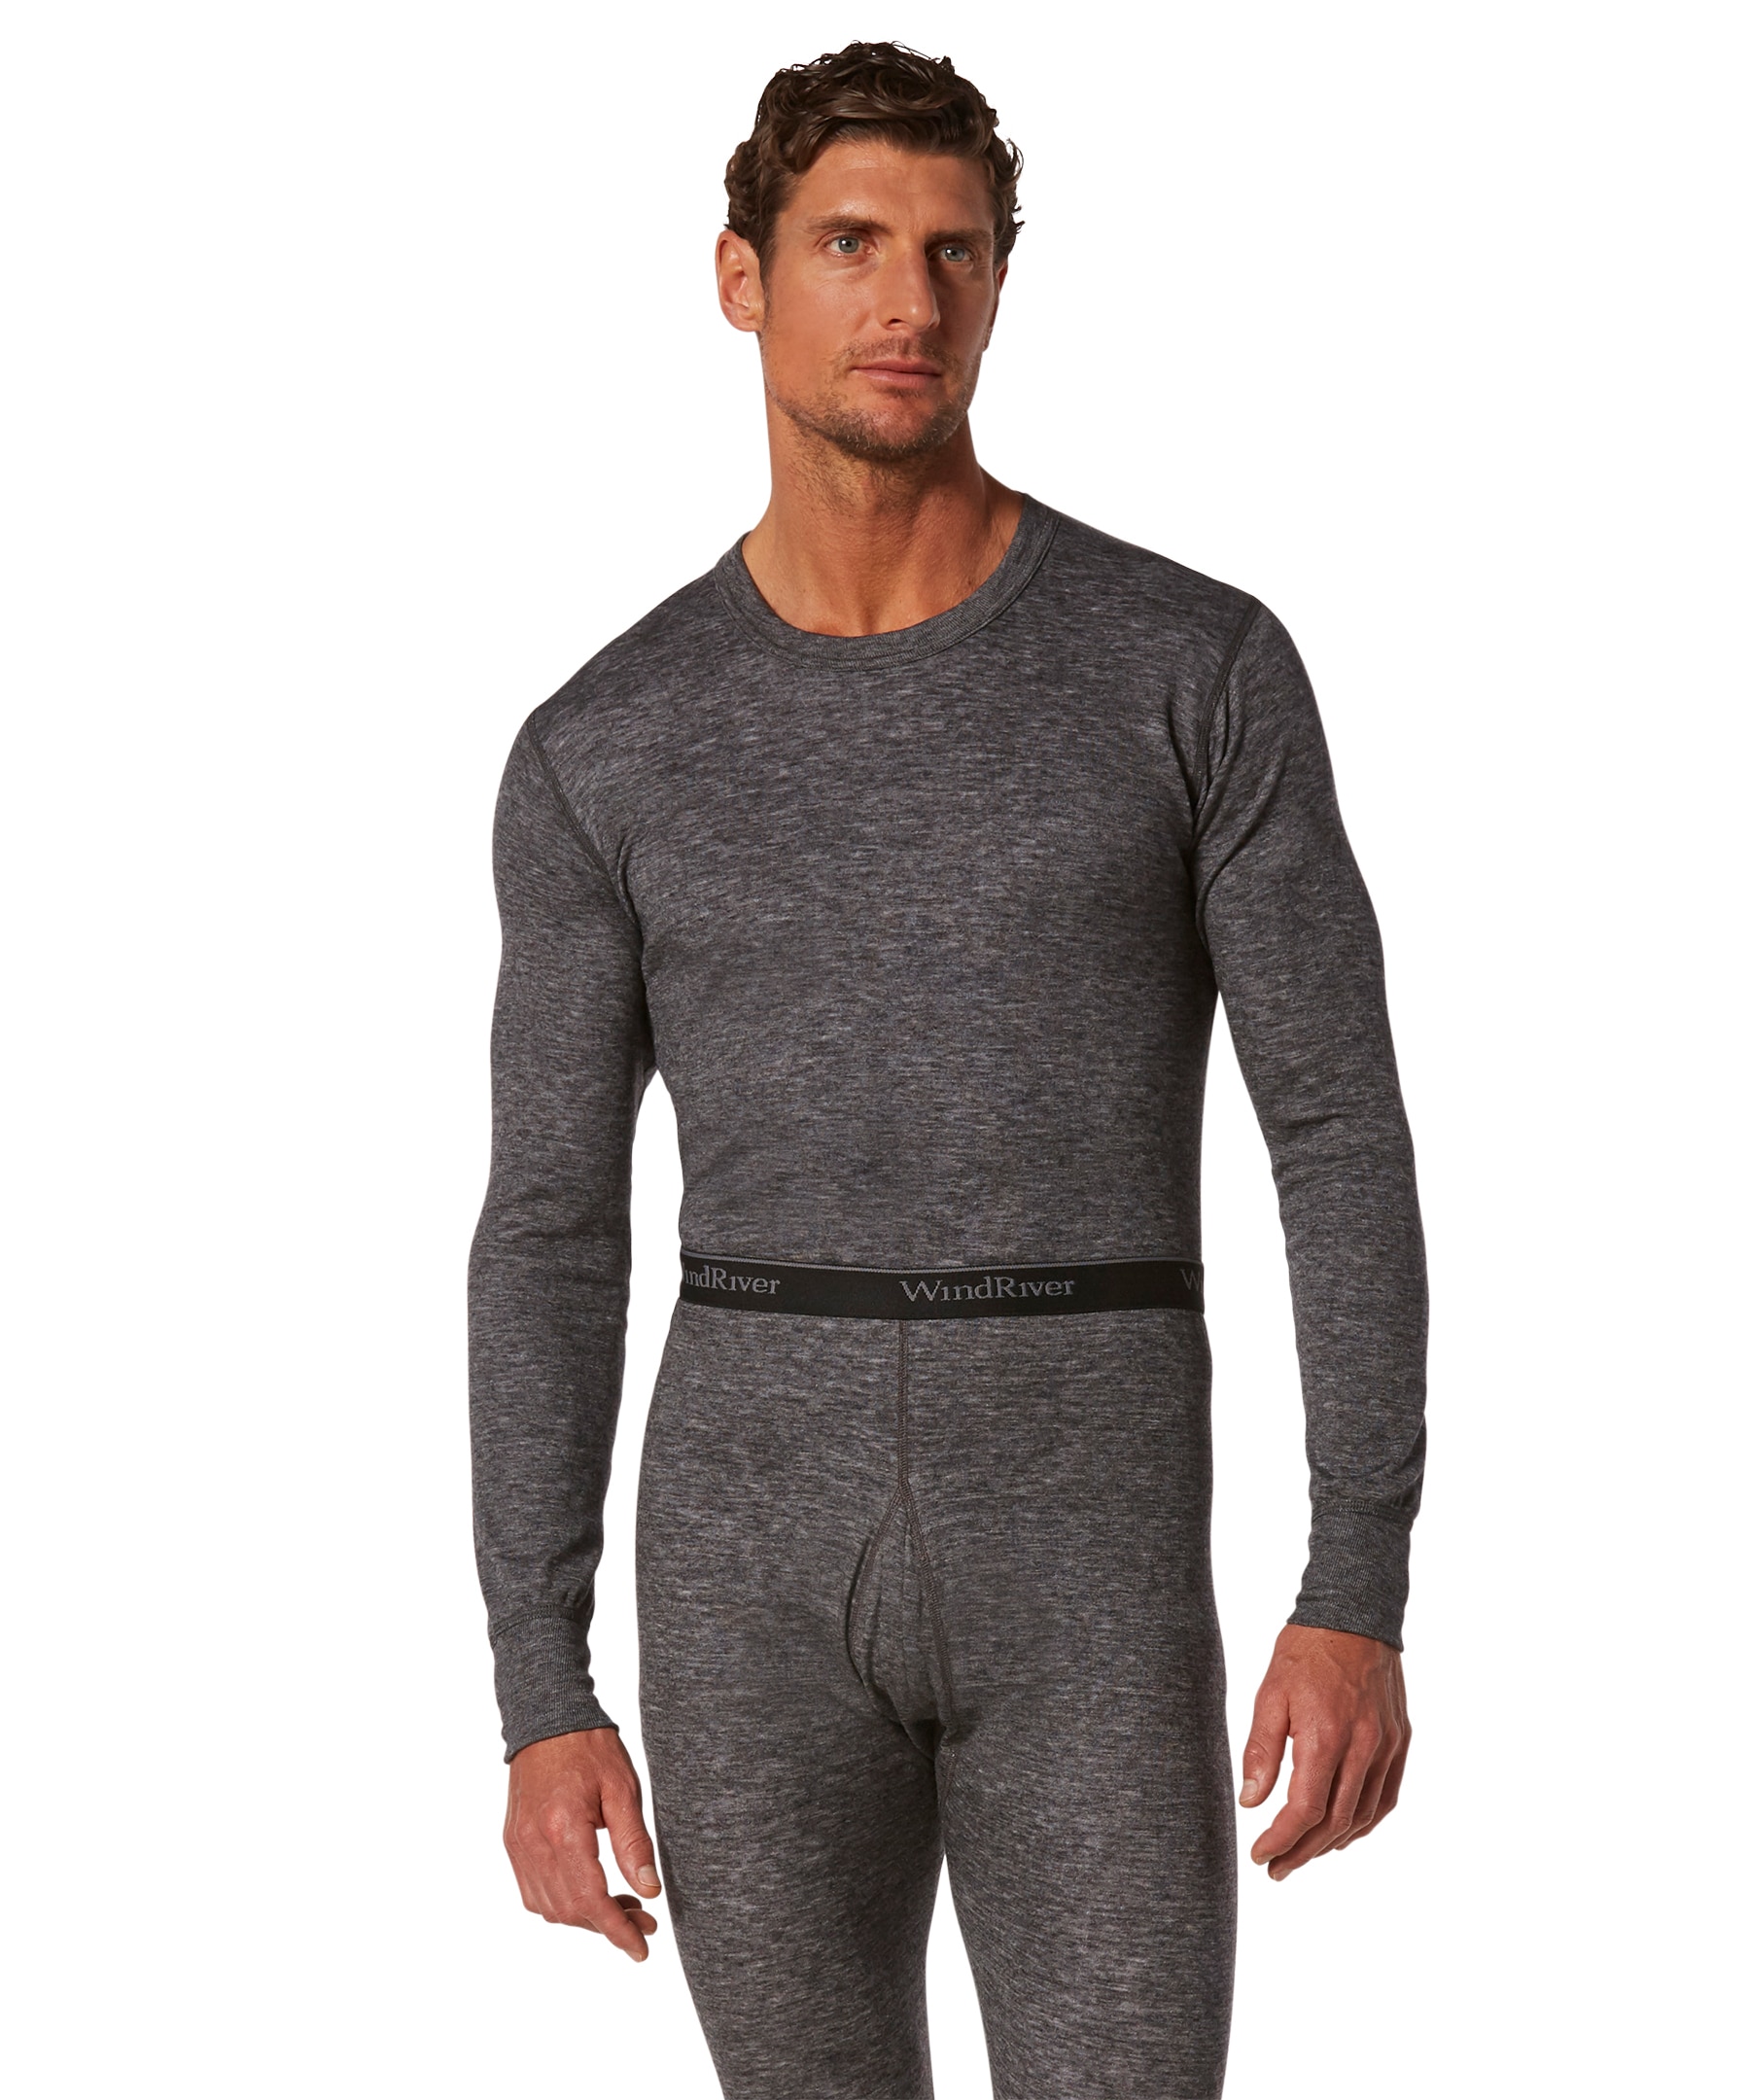 WindRiver Men's 2 Layer Long Sleeve Thermal Shirt With Merino Wool